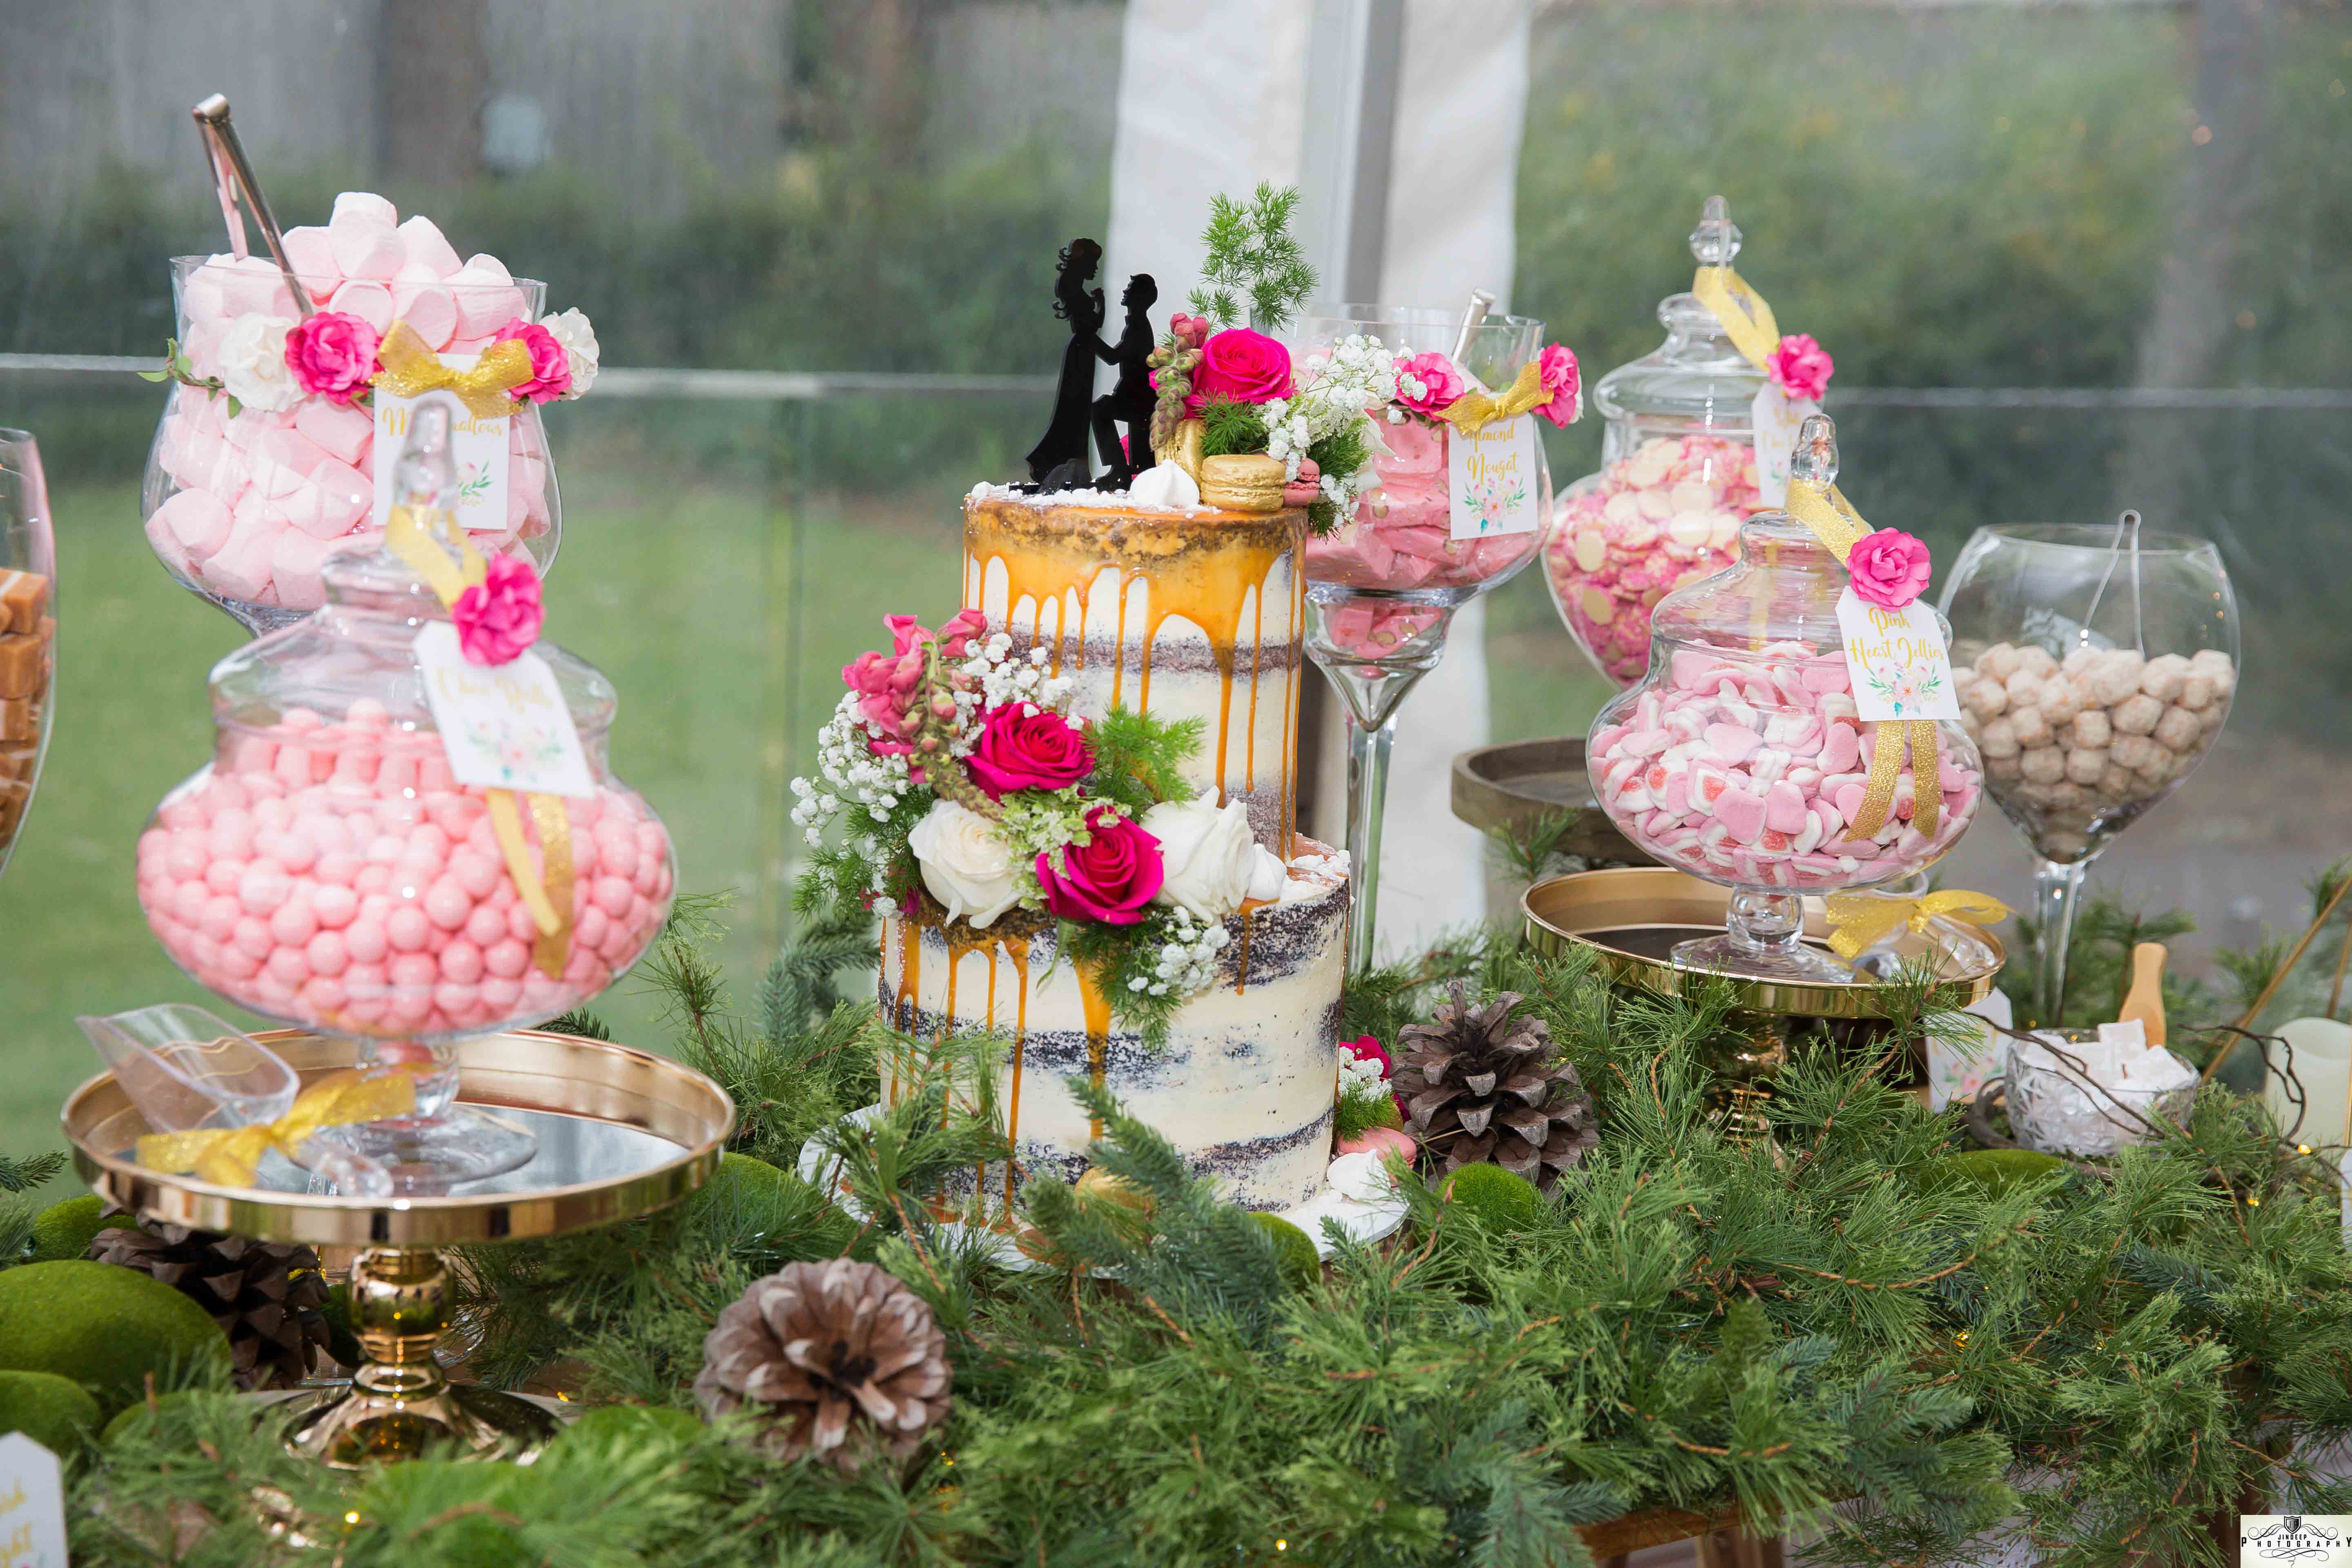 Preet & Marino's Floral Rustic themed Engagement Party Lolly Buffet by A&K